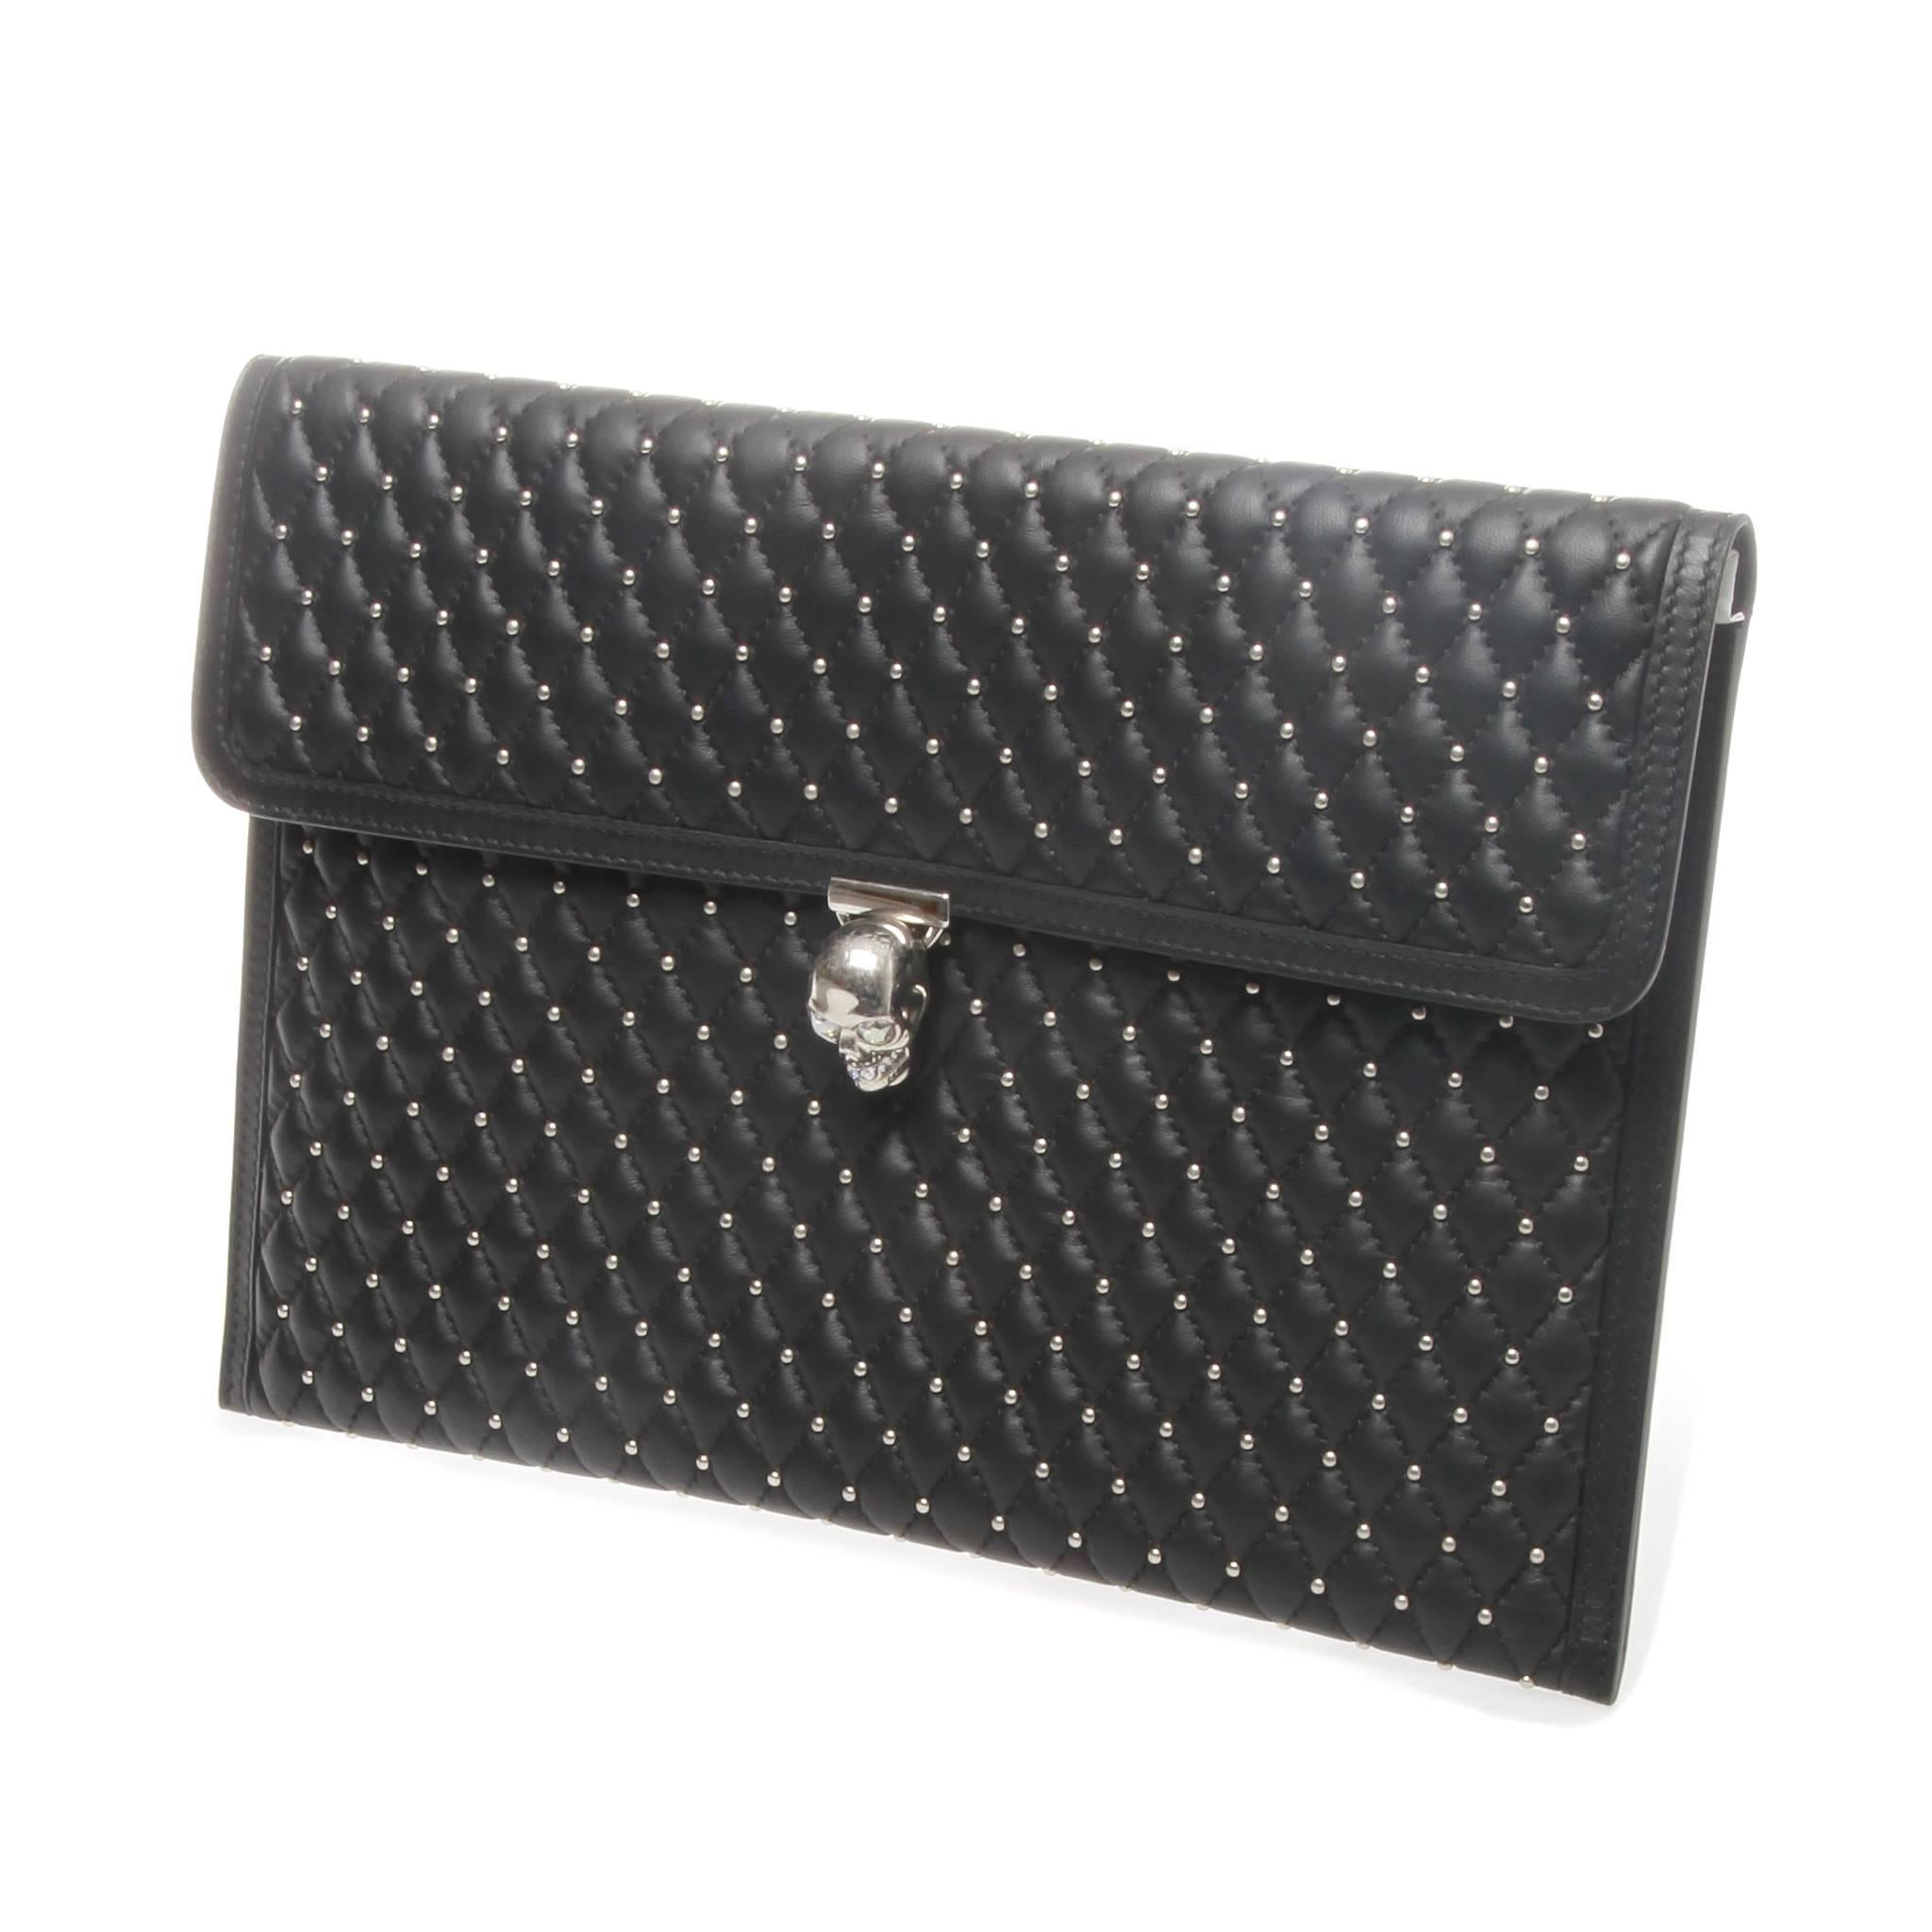 Alexander McQueen pouch clutch in black pad quilted leather featuring silver hardware studding and the iconic skull. 

Closure: Swarovski crystal encrusted skull with twist mechanism

Comes with authentic box